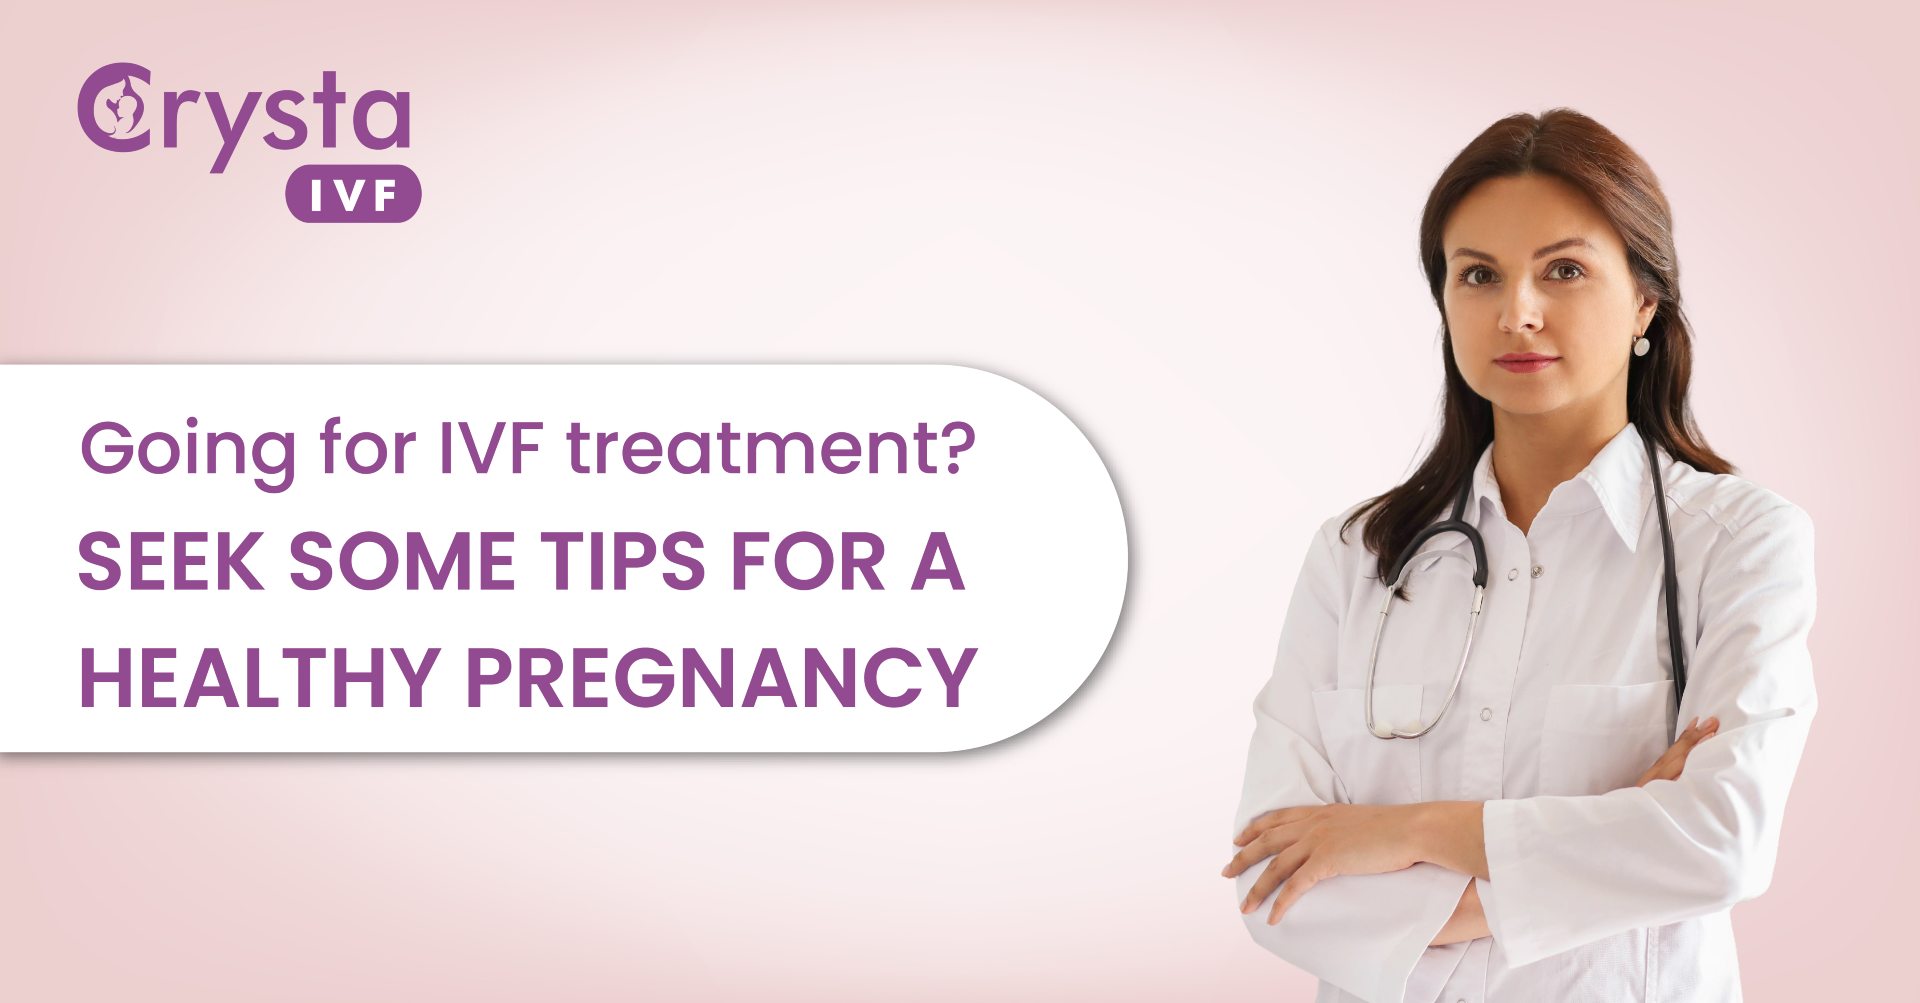 Tips for health pregnancy